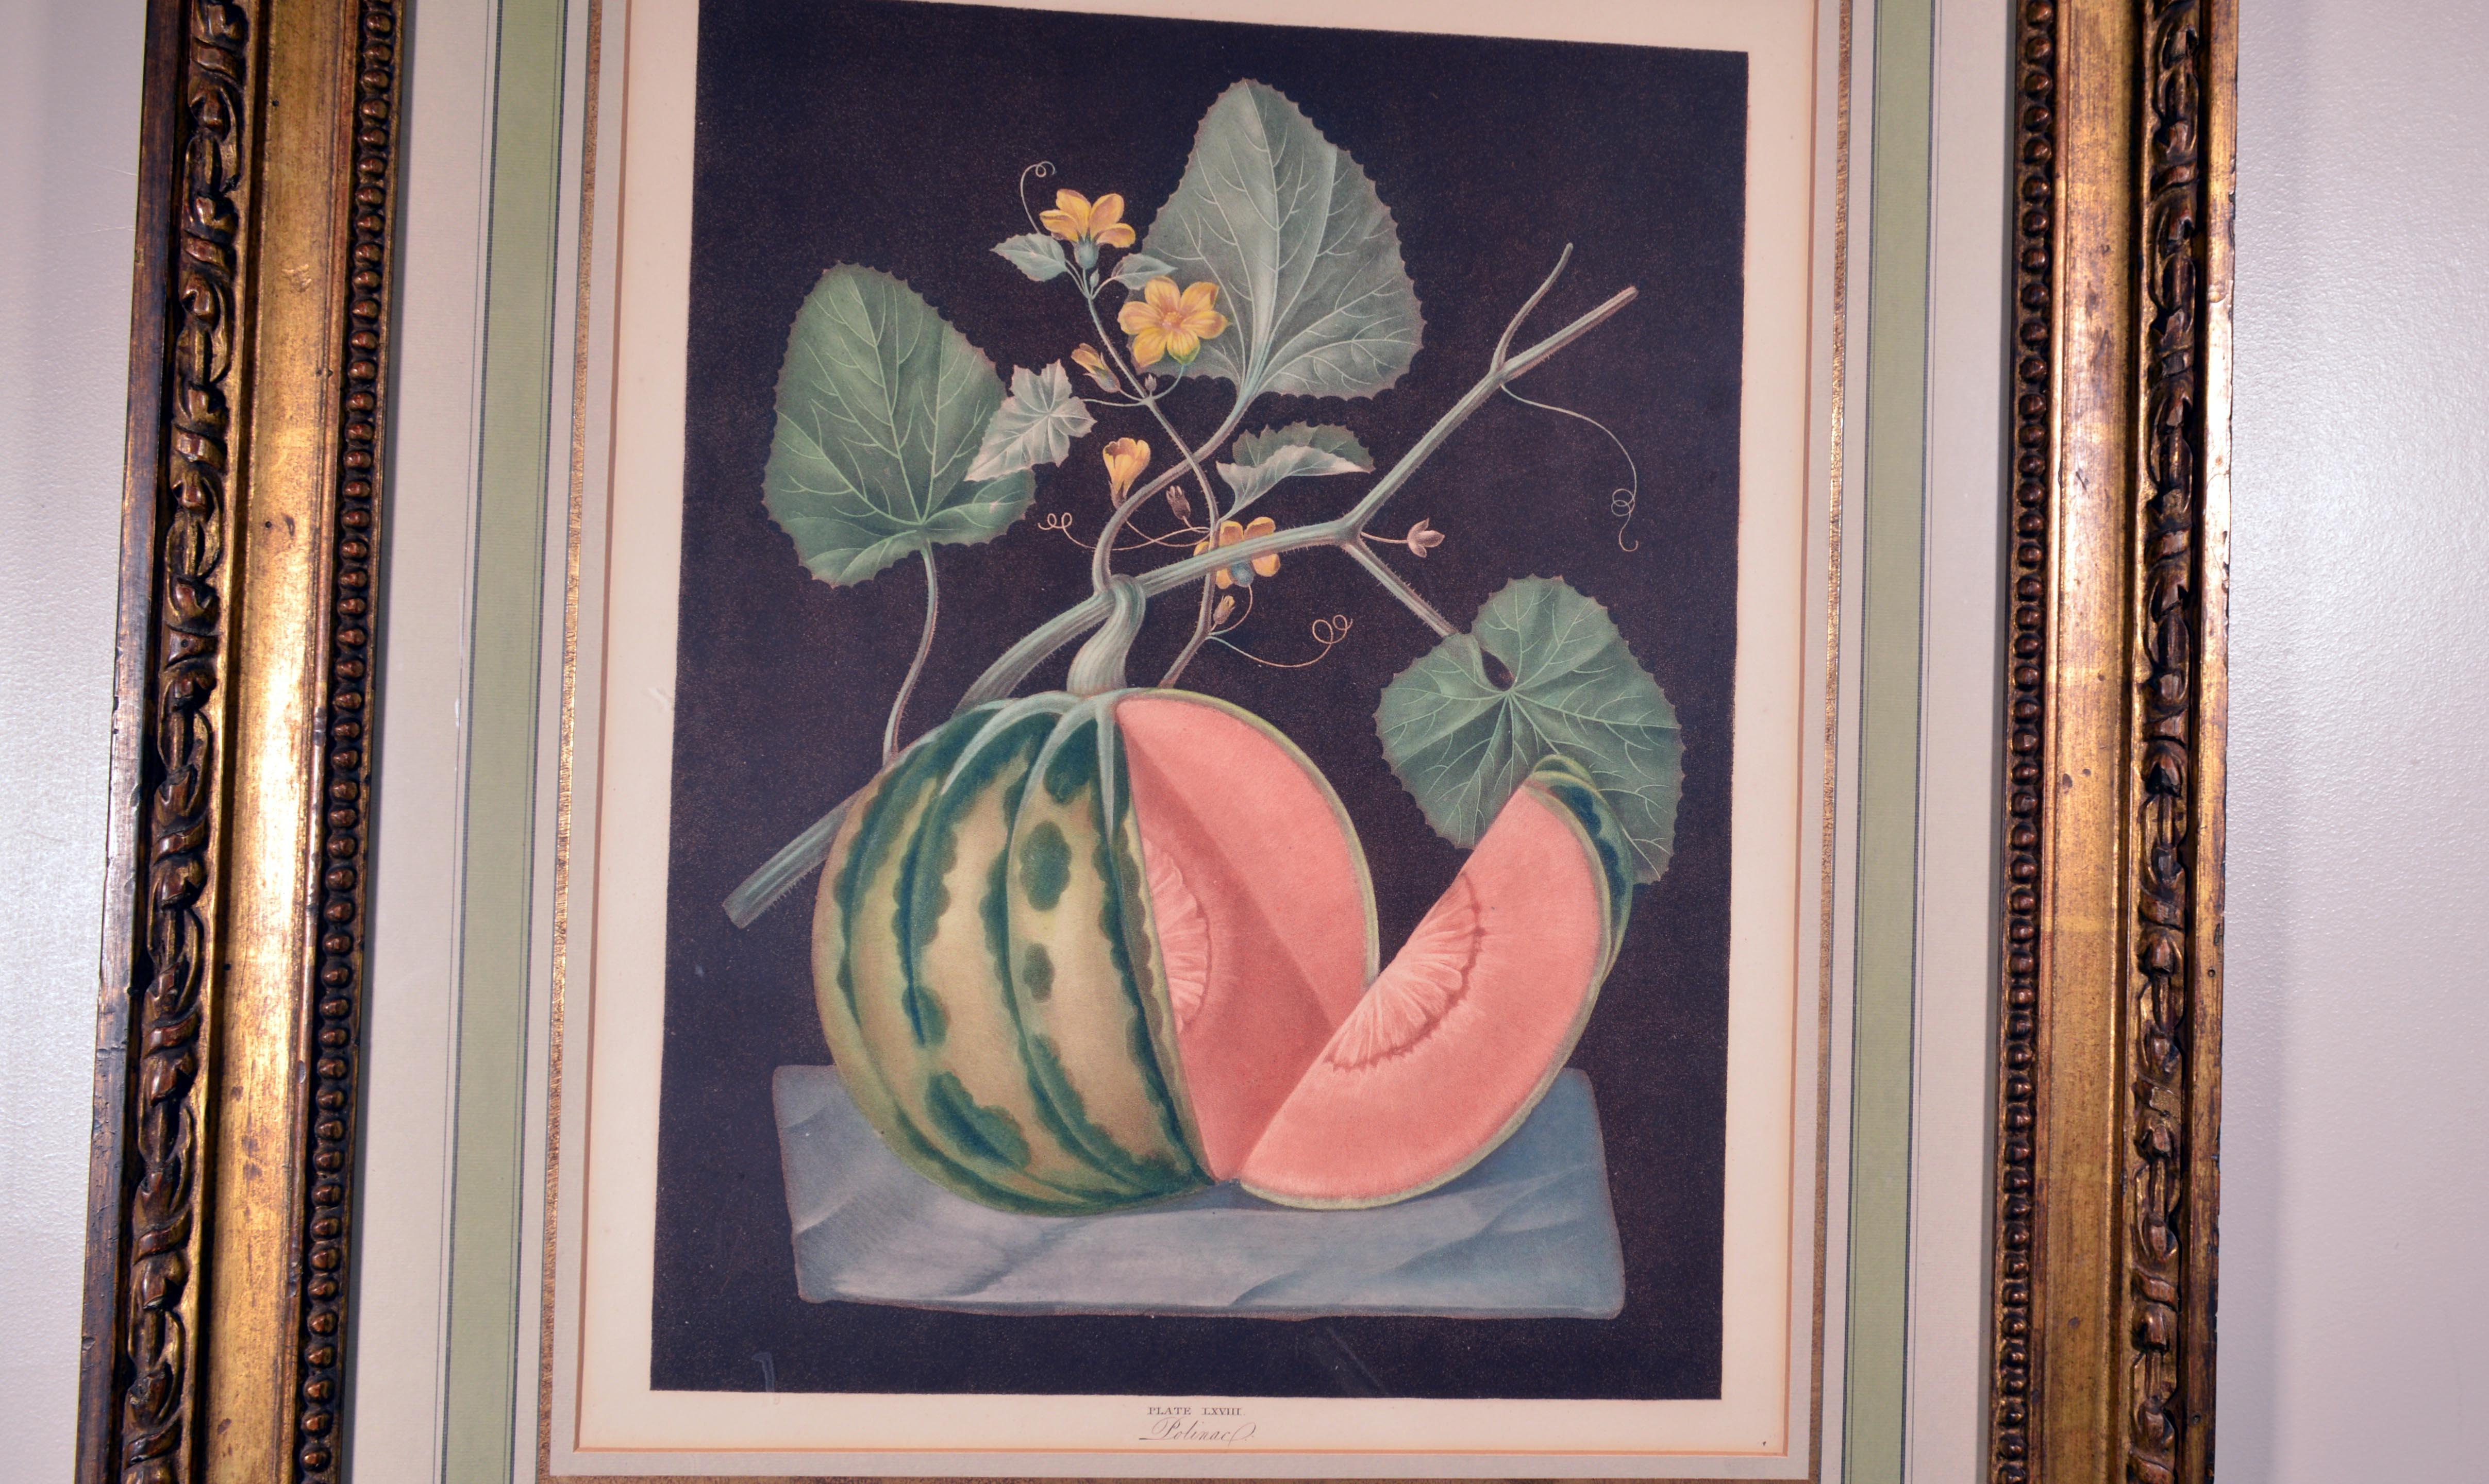 Paper George Brookshaw Framed Engraving of a Melon, Plate Lxviii, Polinac